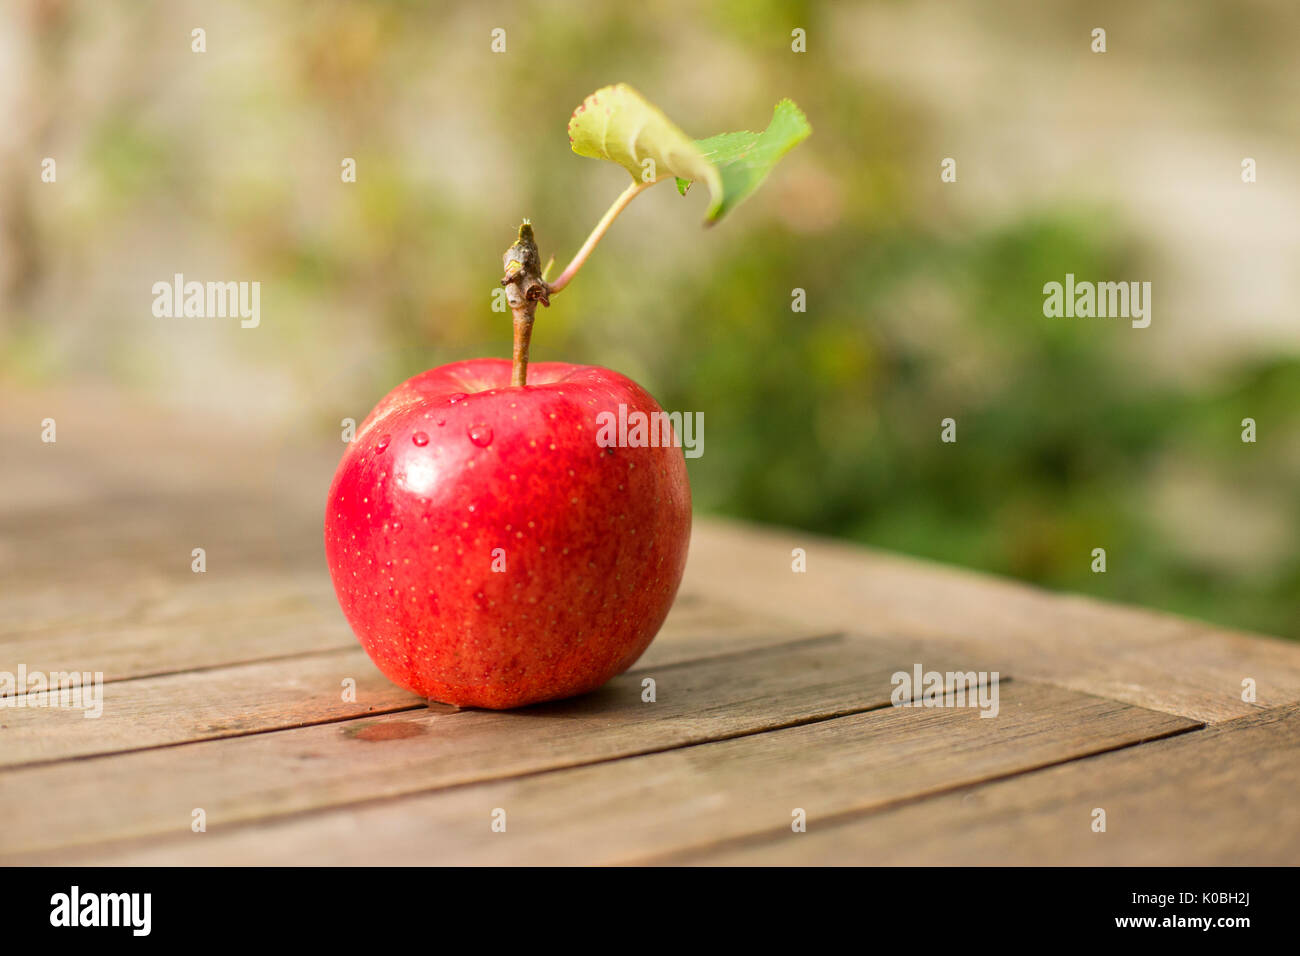 Fresh red apple on wooden table Stock Photo